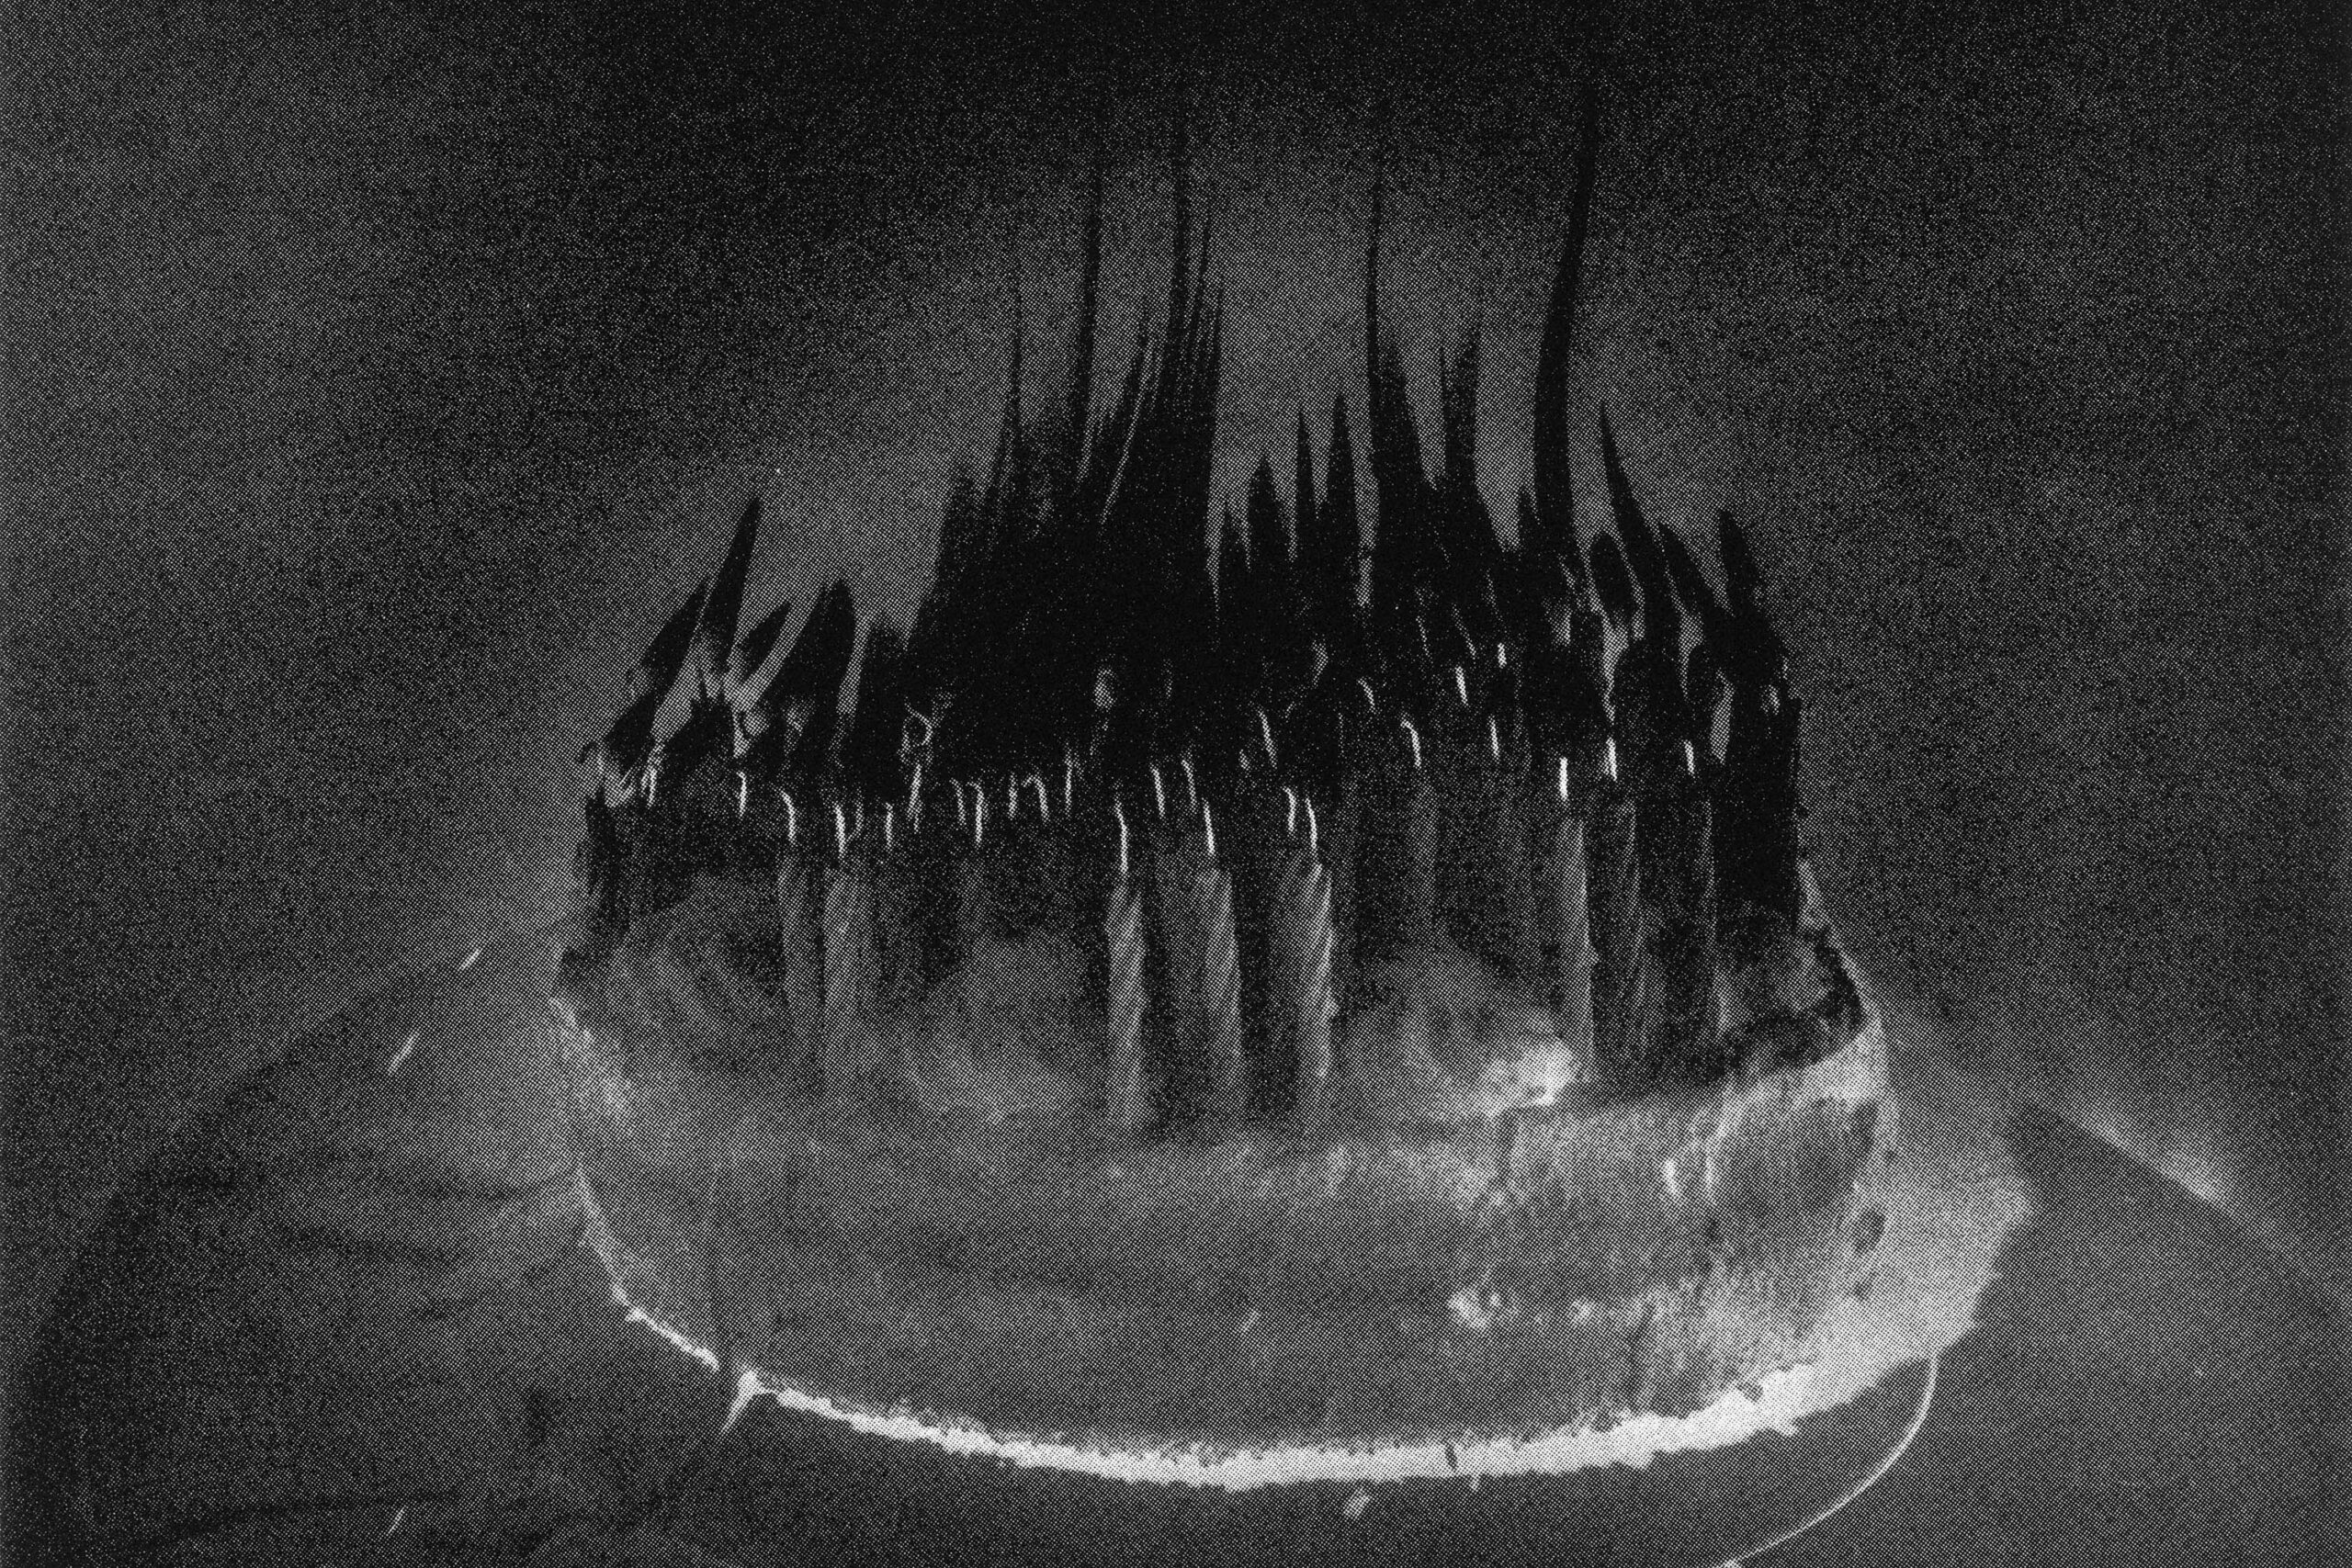 A black and white photo of lit candles on a birthday cake representing the search query 'Photos depicting mass hysteria phenomenon'.